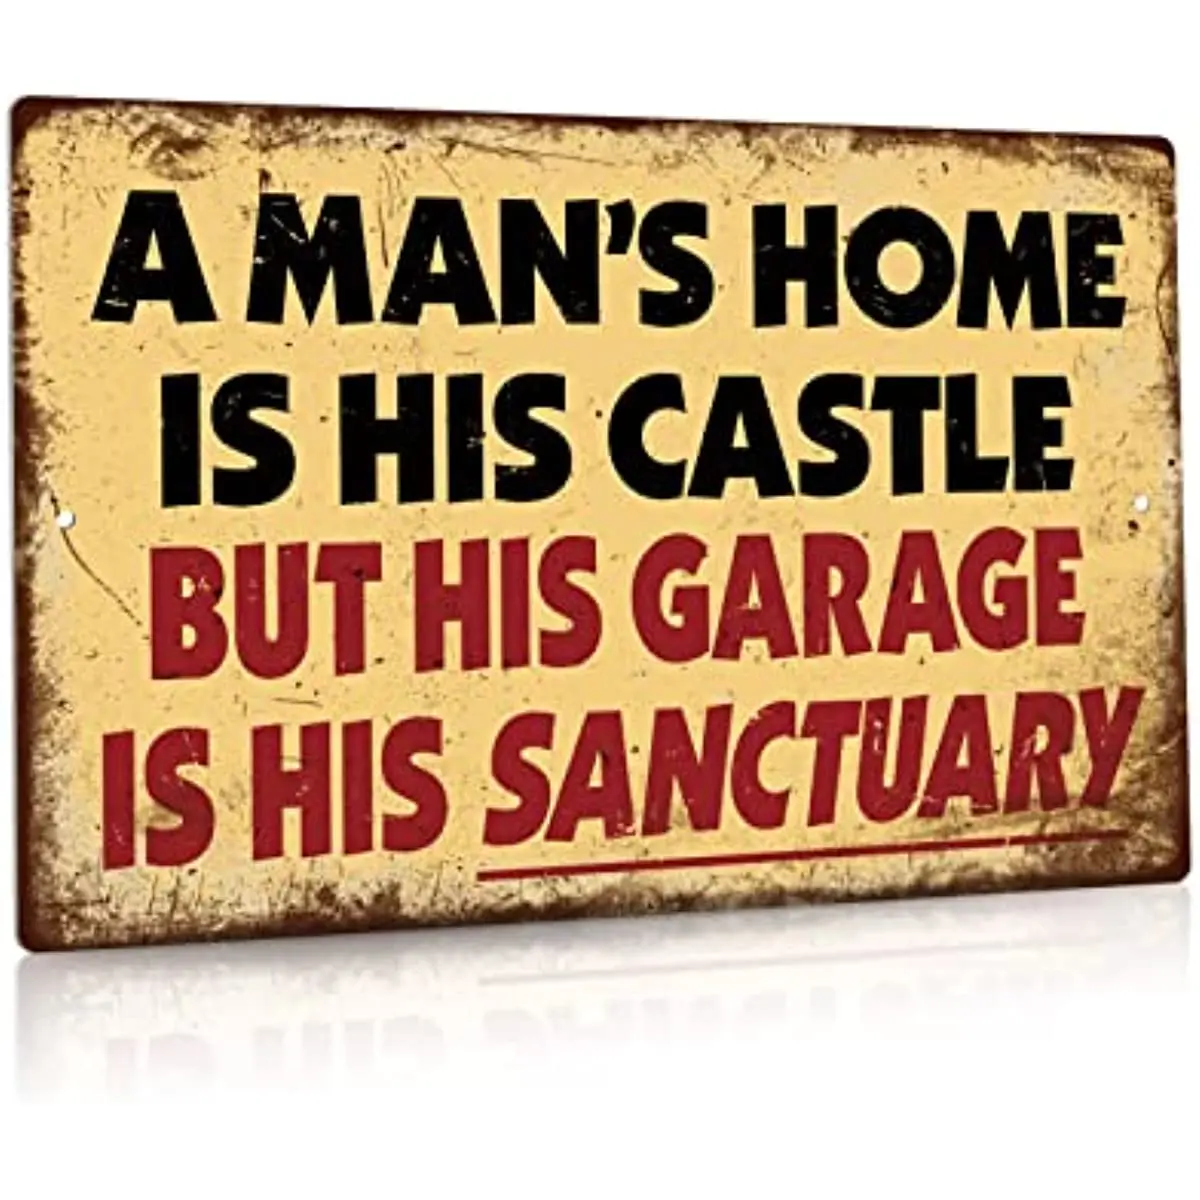 

Funny Decor Metal Tin Sign Garage Man Cave Wall Decor A Man'S Home Is His Castle But His Garage Is His Sanctuary